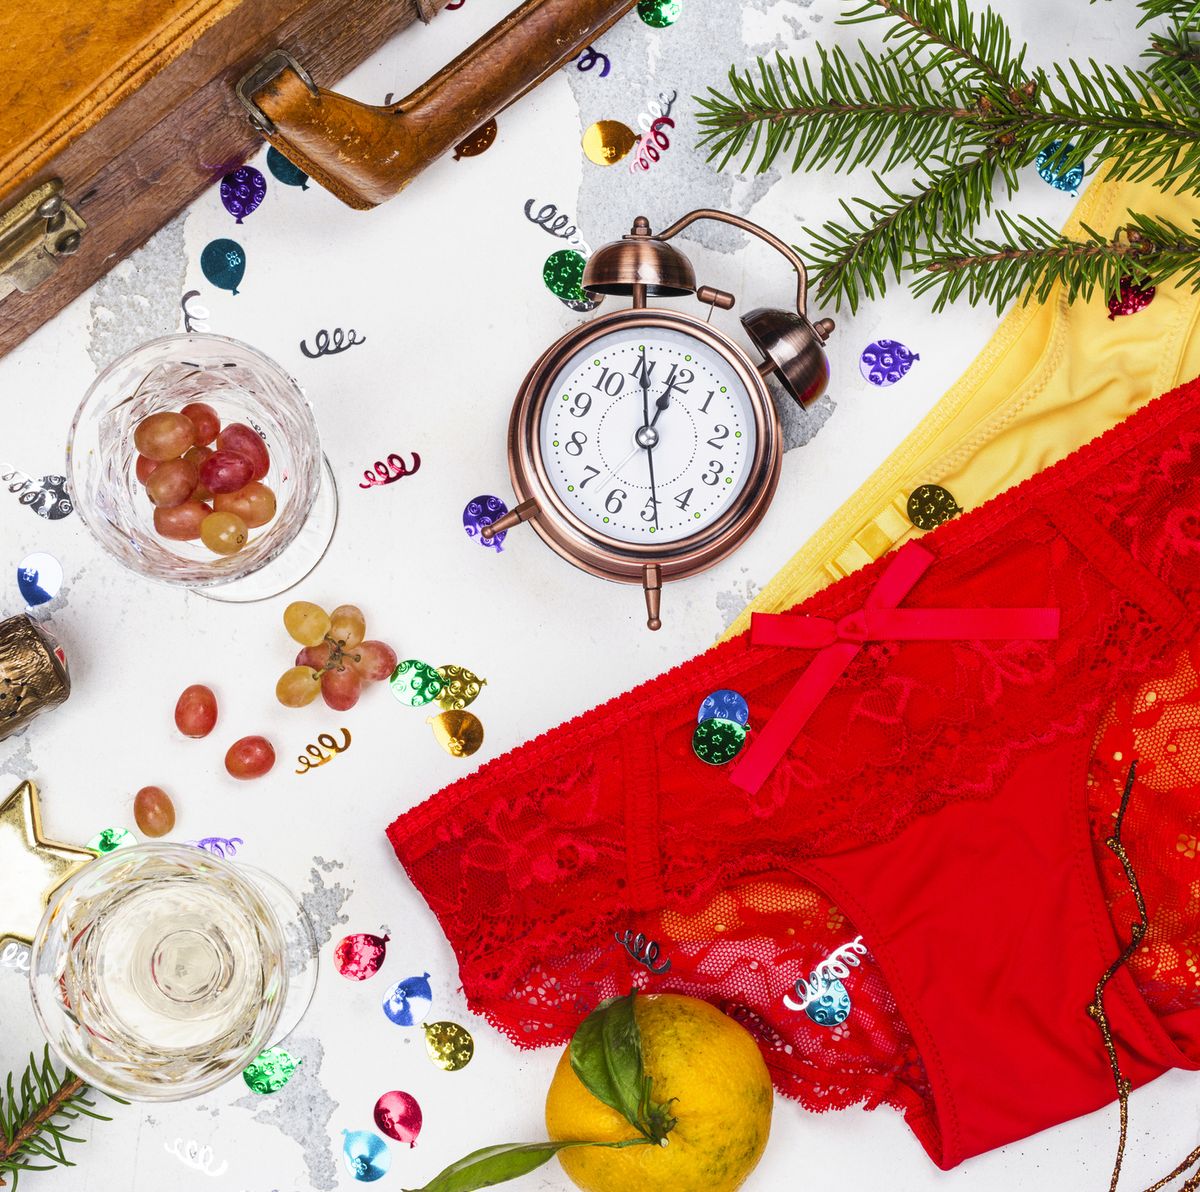 Spain's Unique New Year's Eve Tradition: Red Underwear for Luck